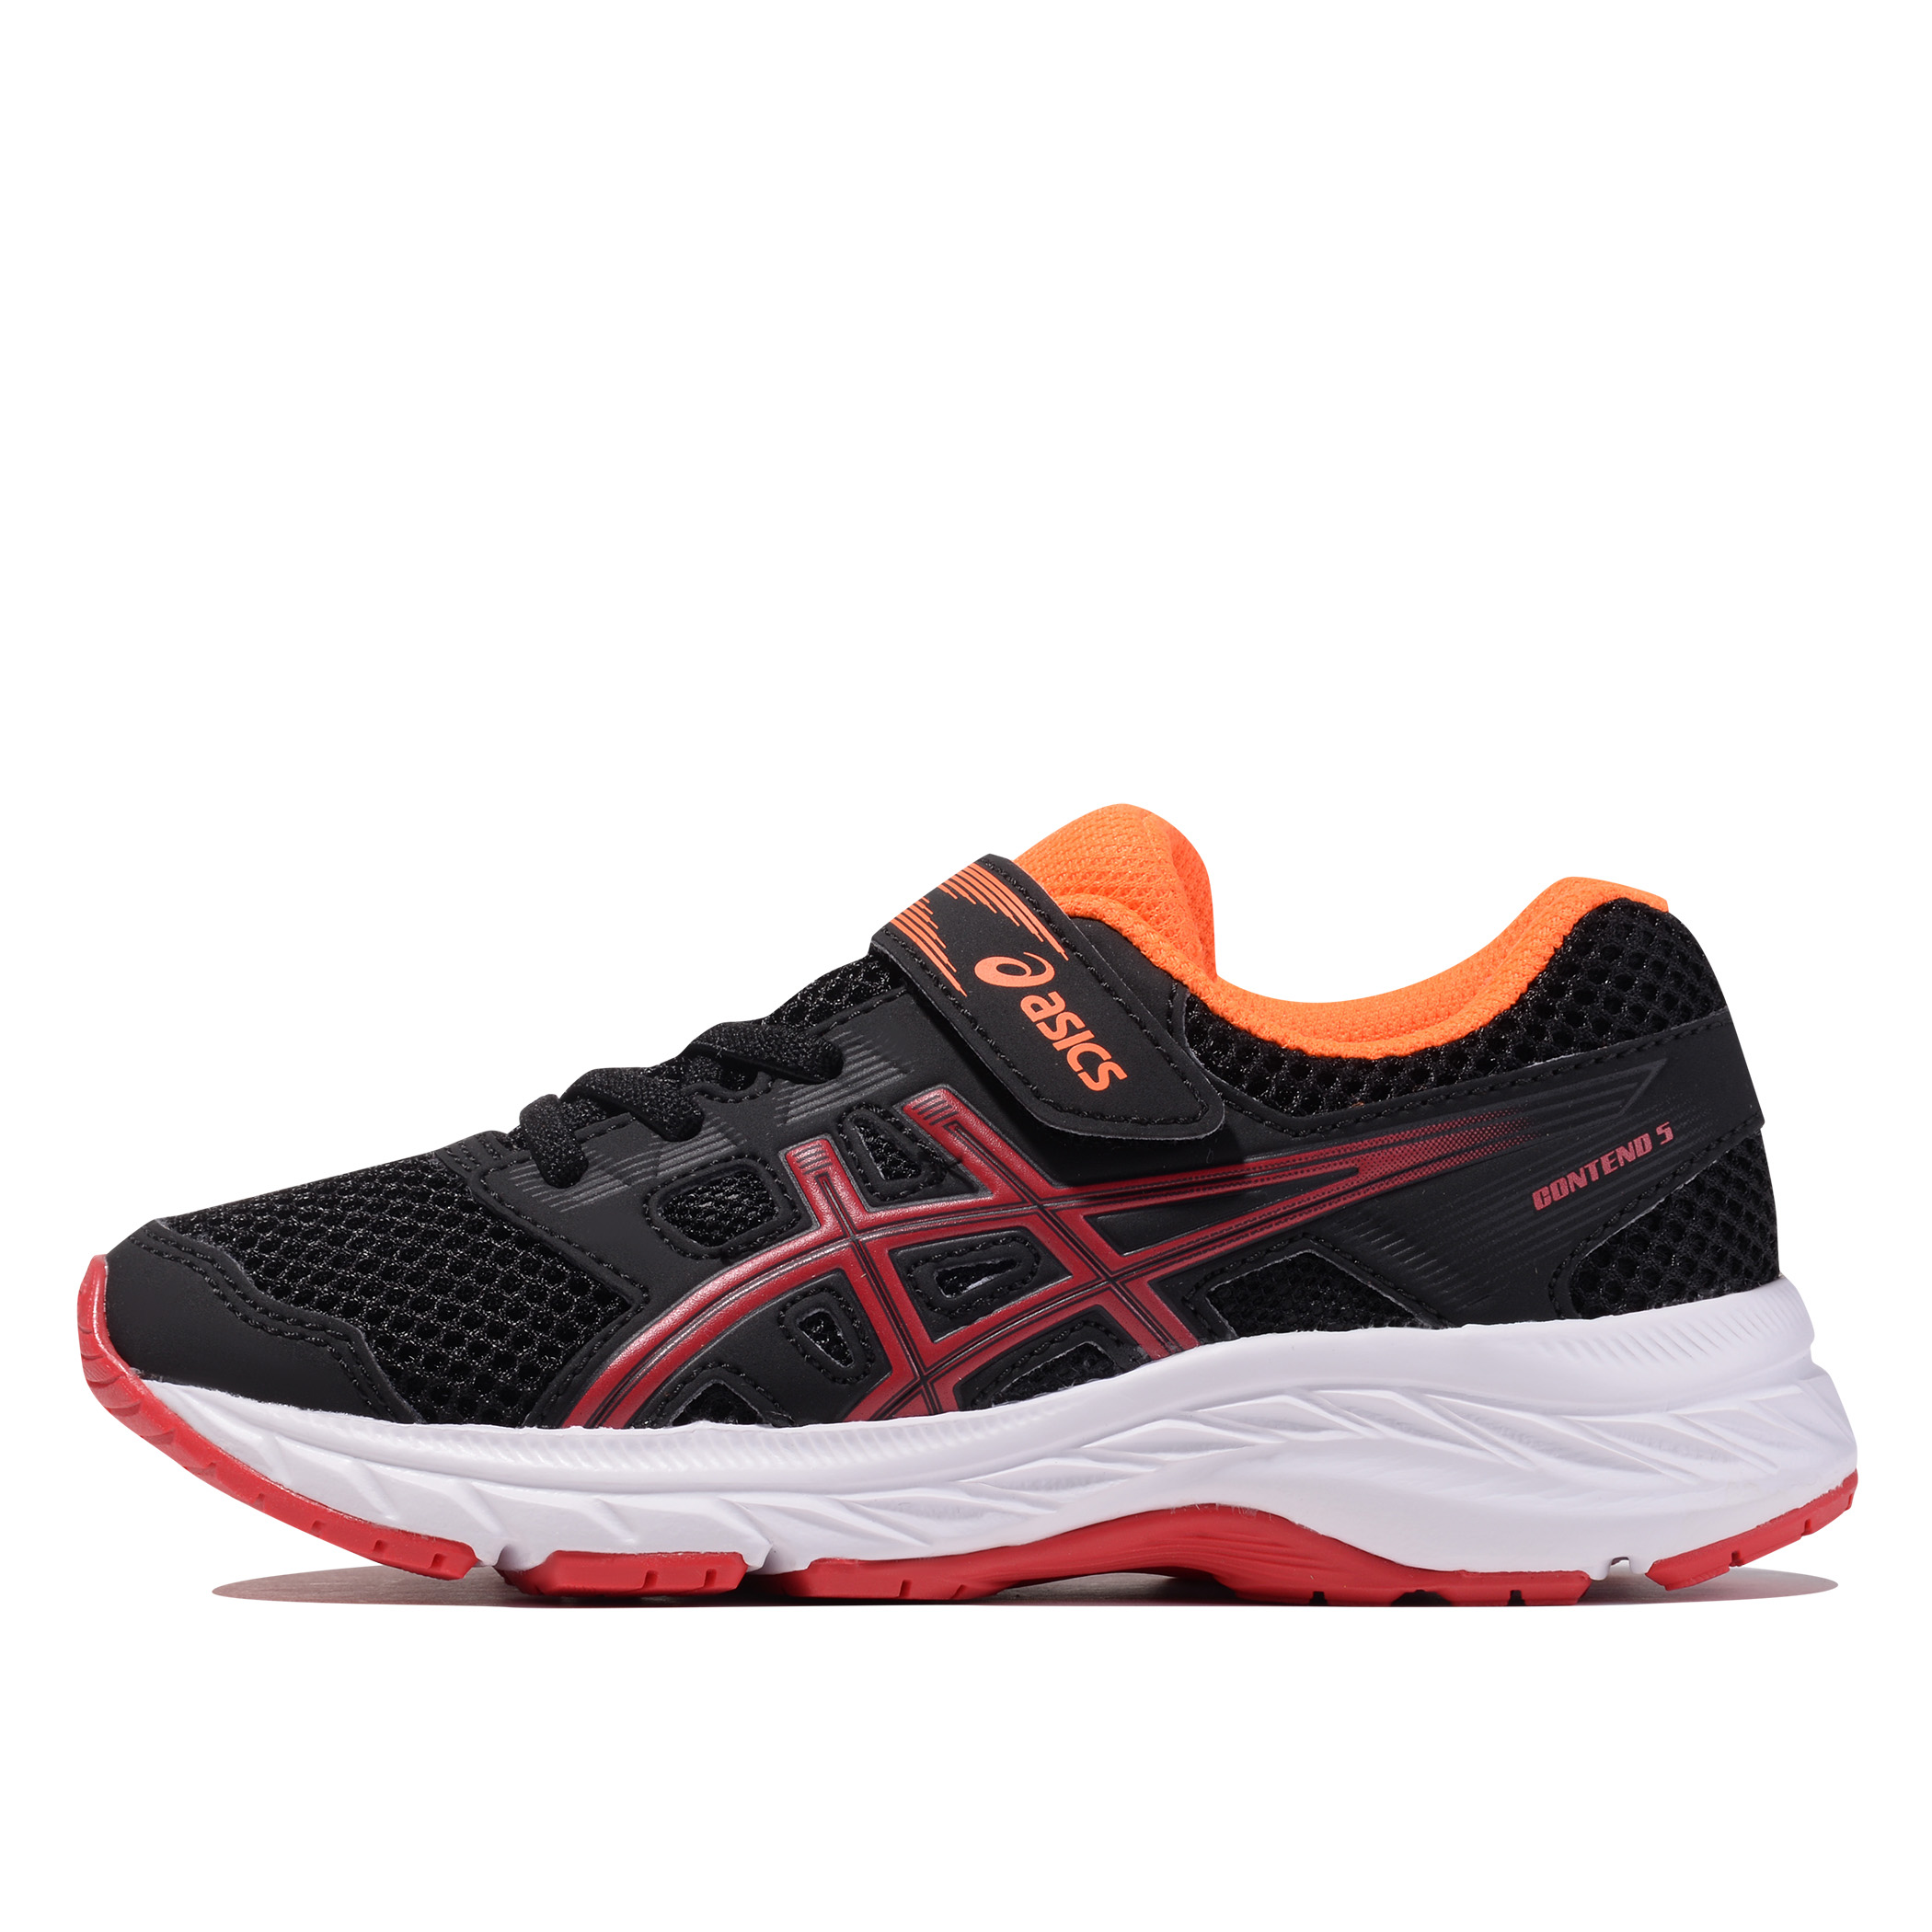 asics contend 5 ps